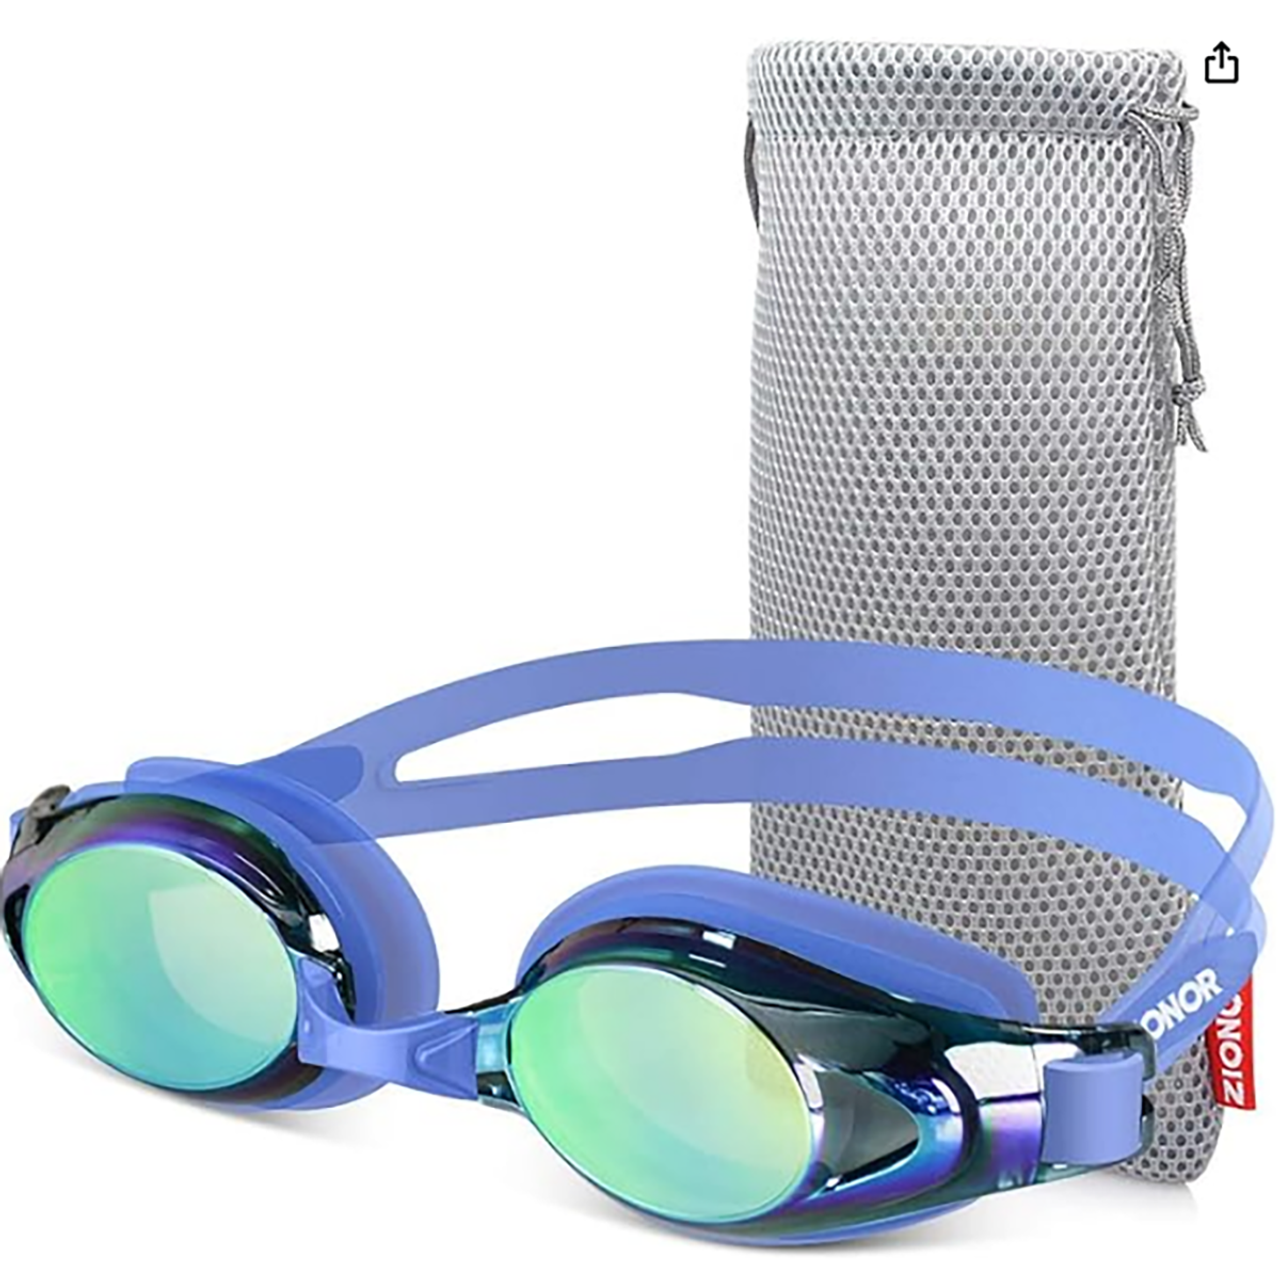 ZIONOR® Adults' G8 Anti-Fog Swim Goggles with UV Protection (2-Pack) product image